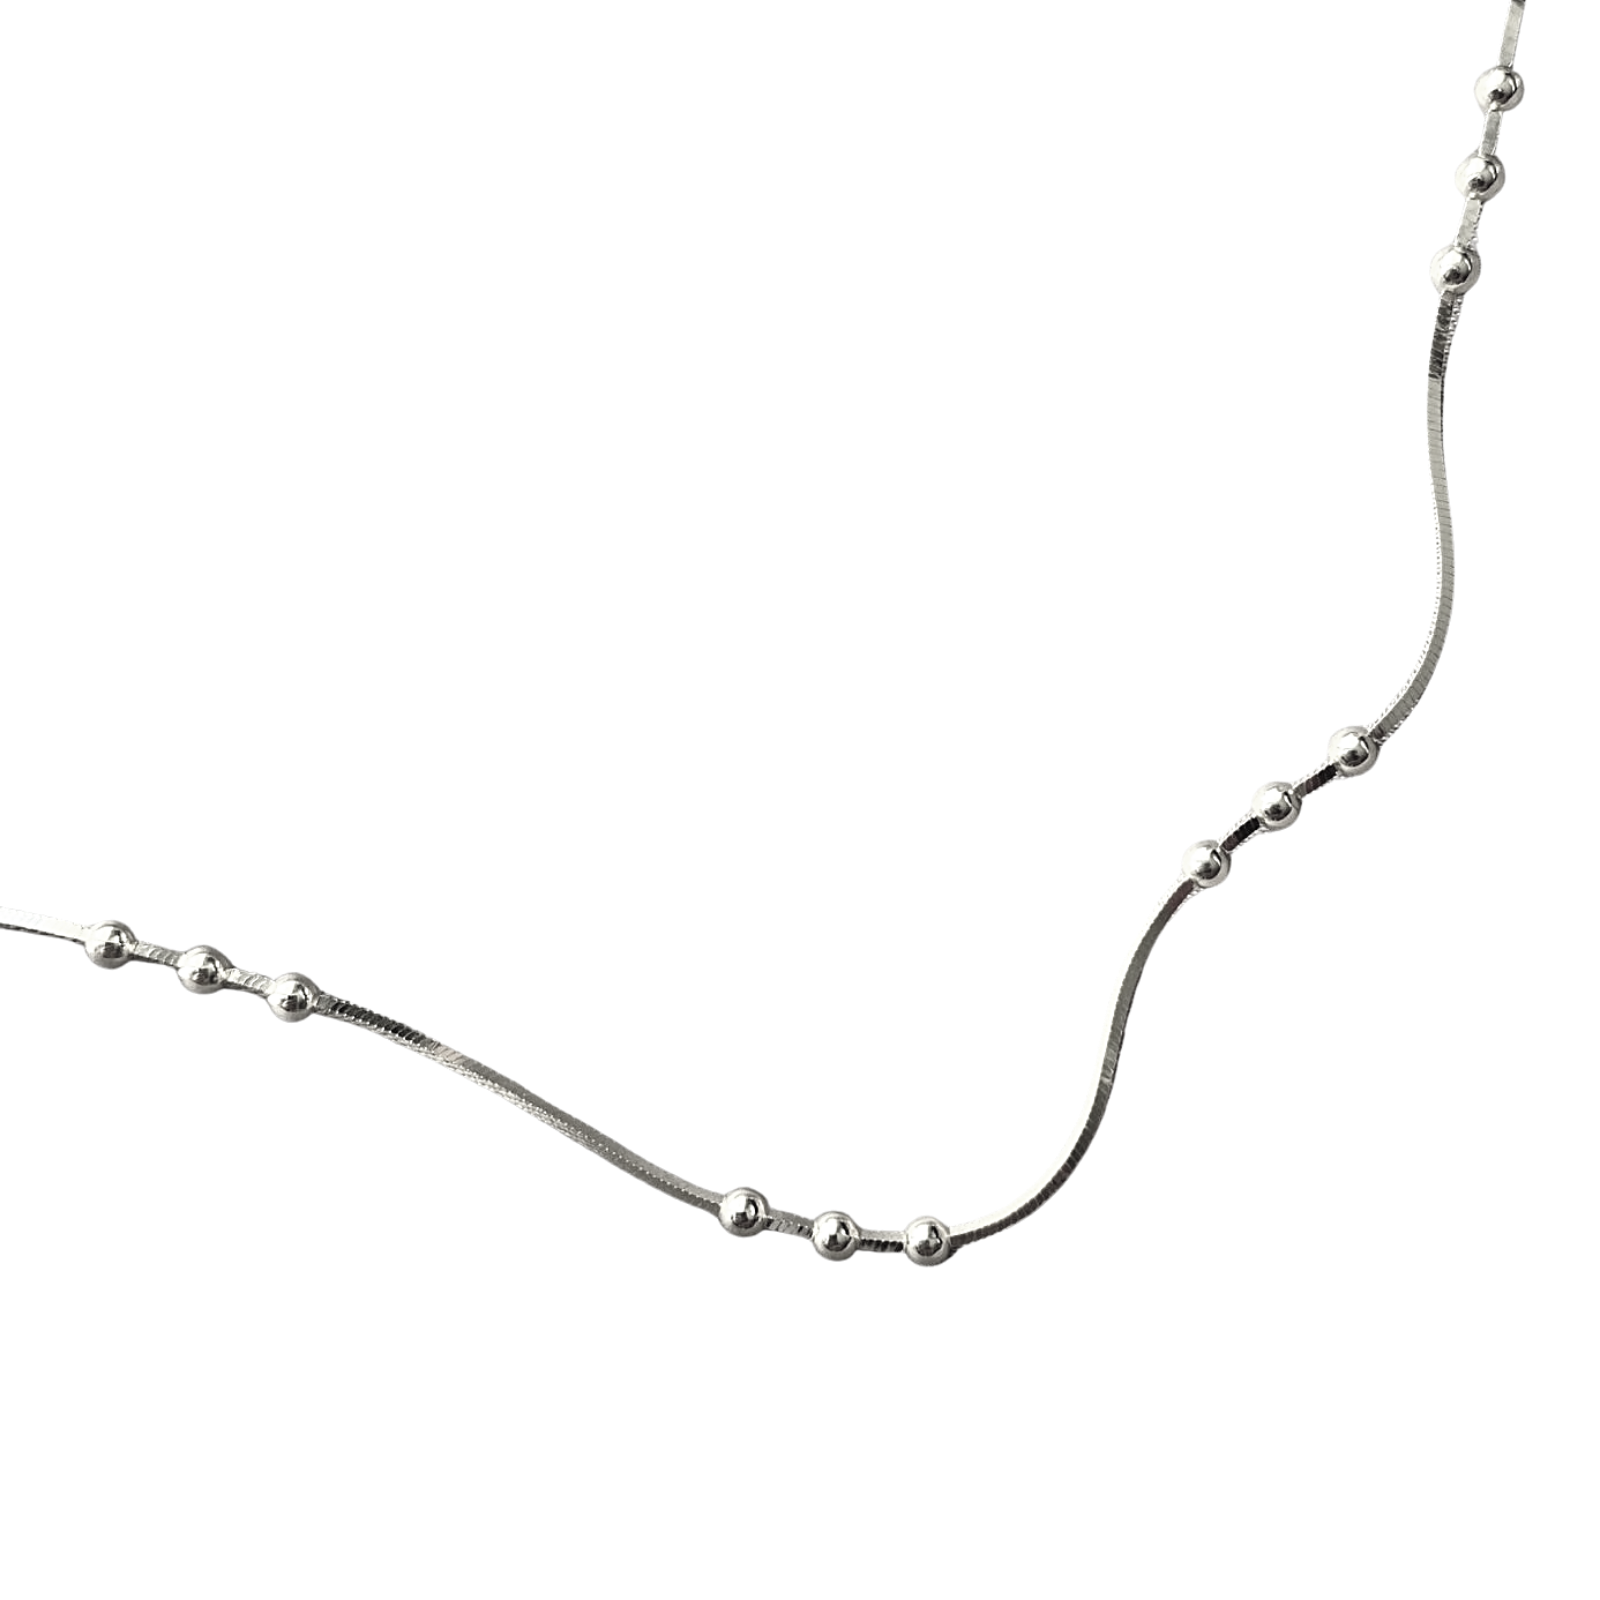 Three Bead Sterling Silver Chain Satellite Necklace - Spero London